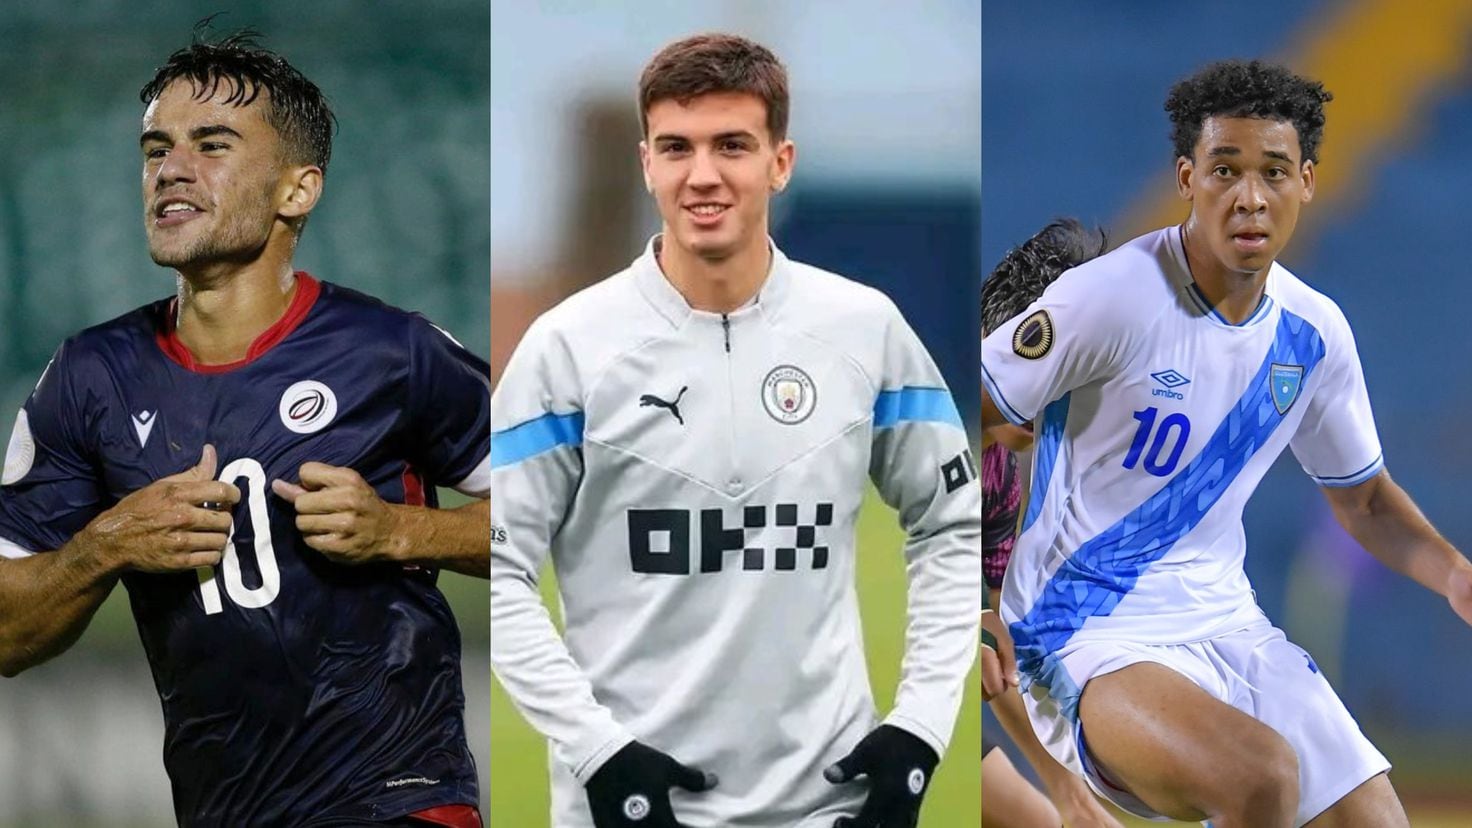 The 10 Latin figures to follow at the Under 20 World Cup in Argentina